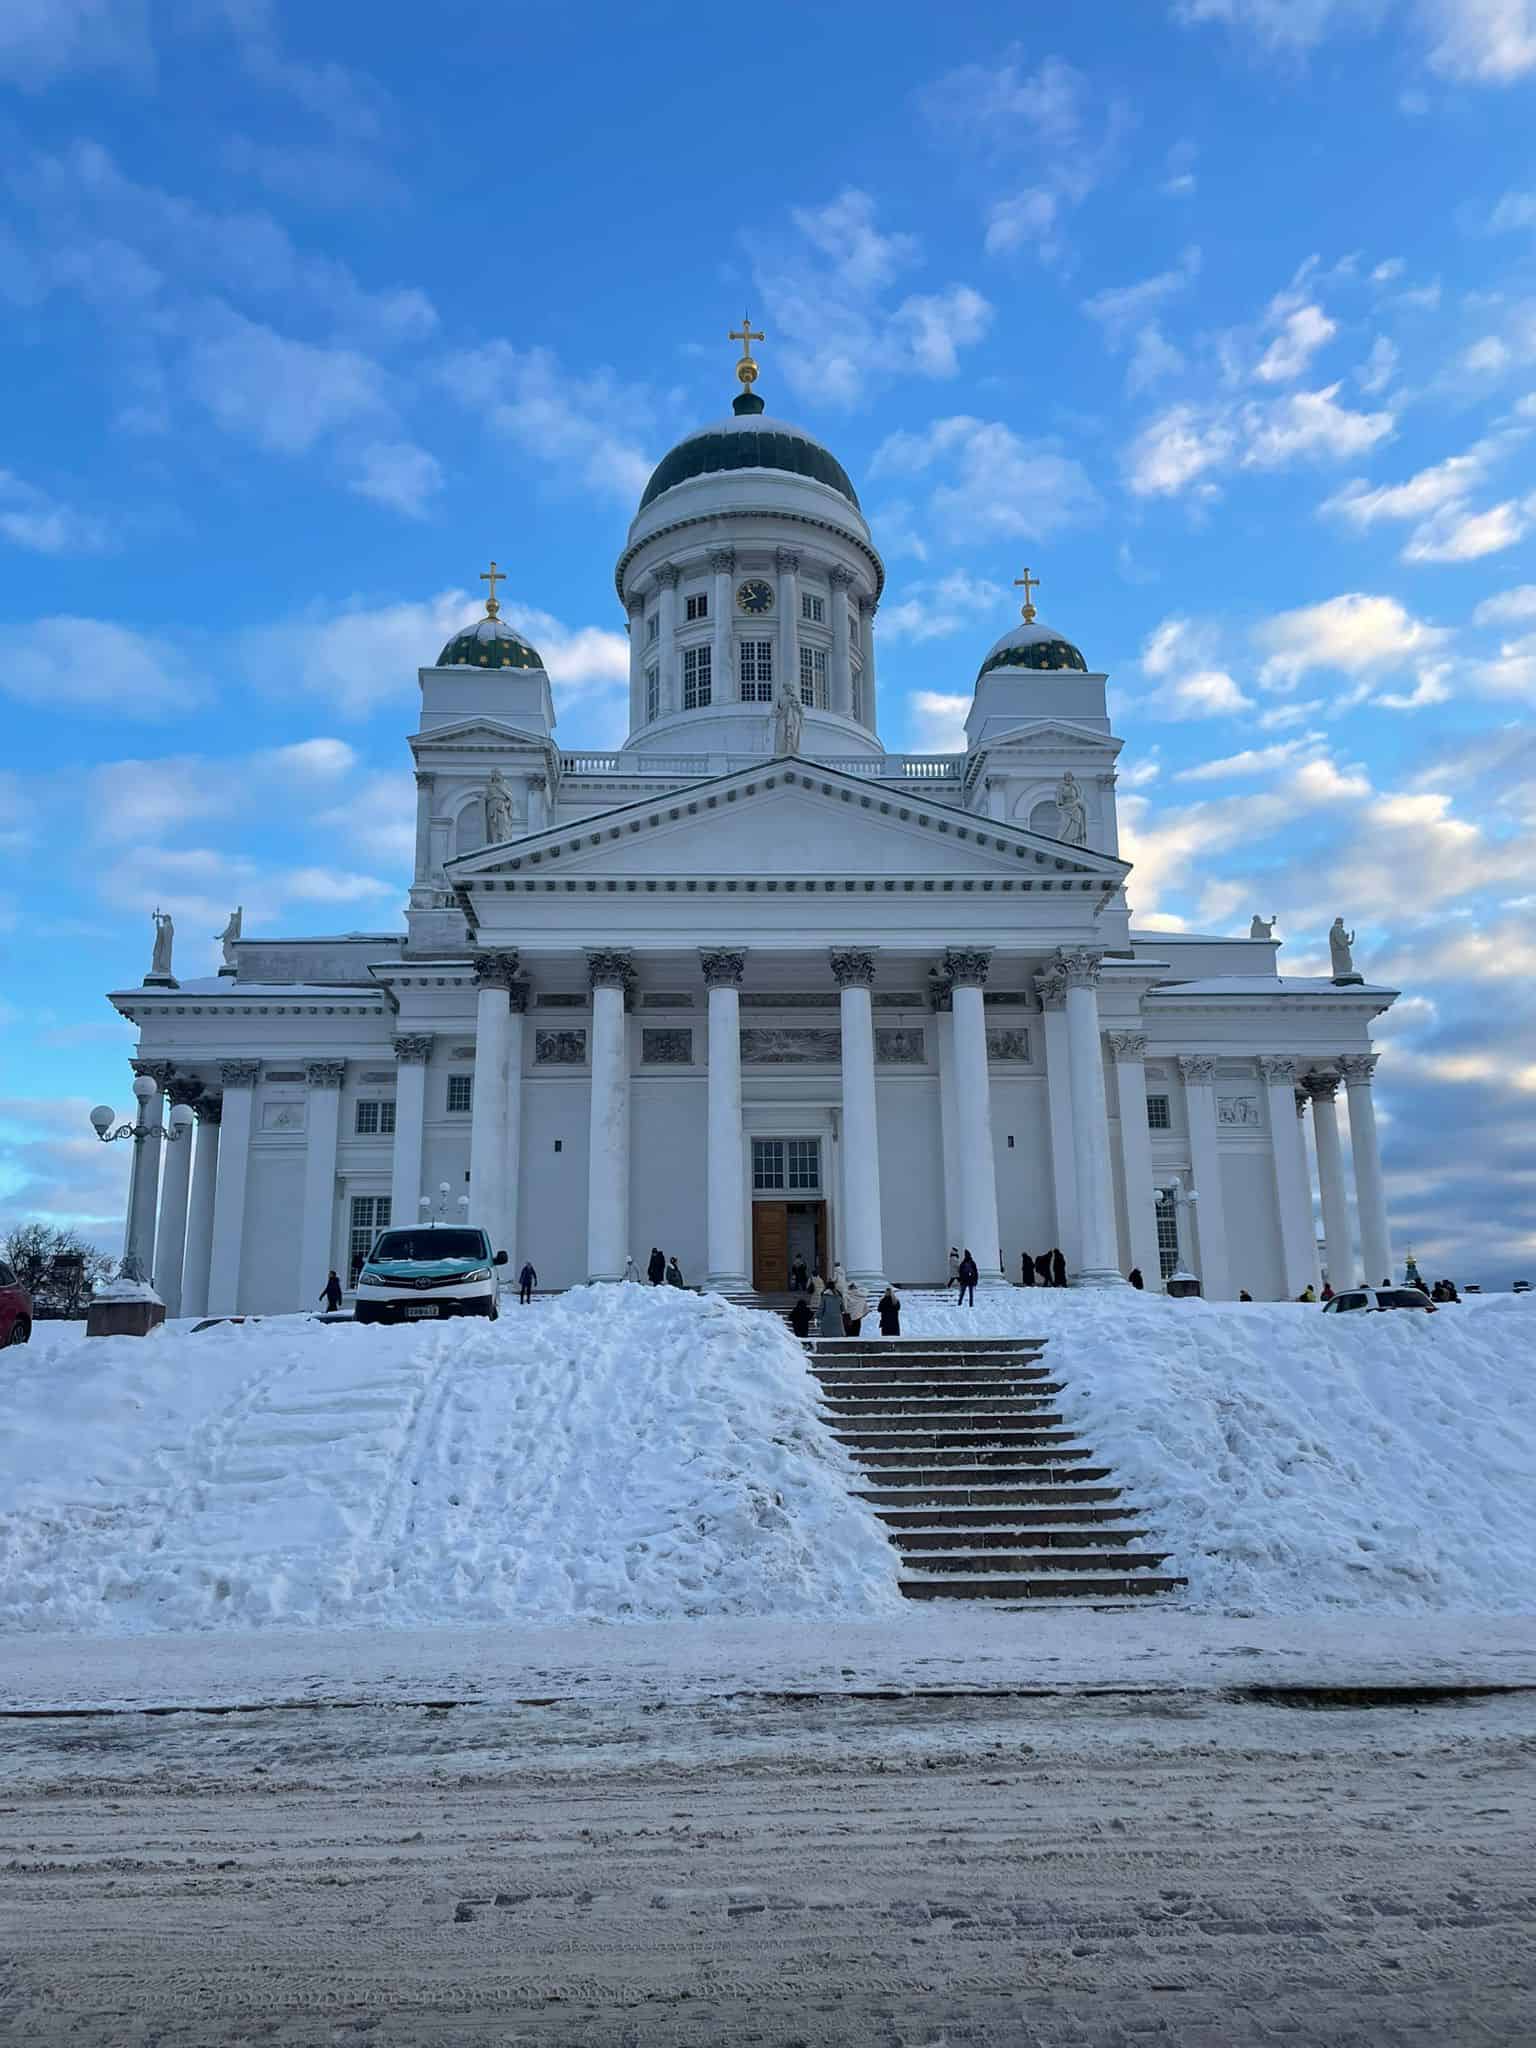 Helsinki Cathedral covered in snow